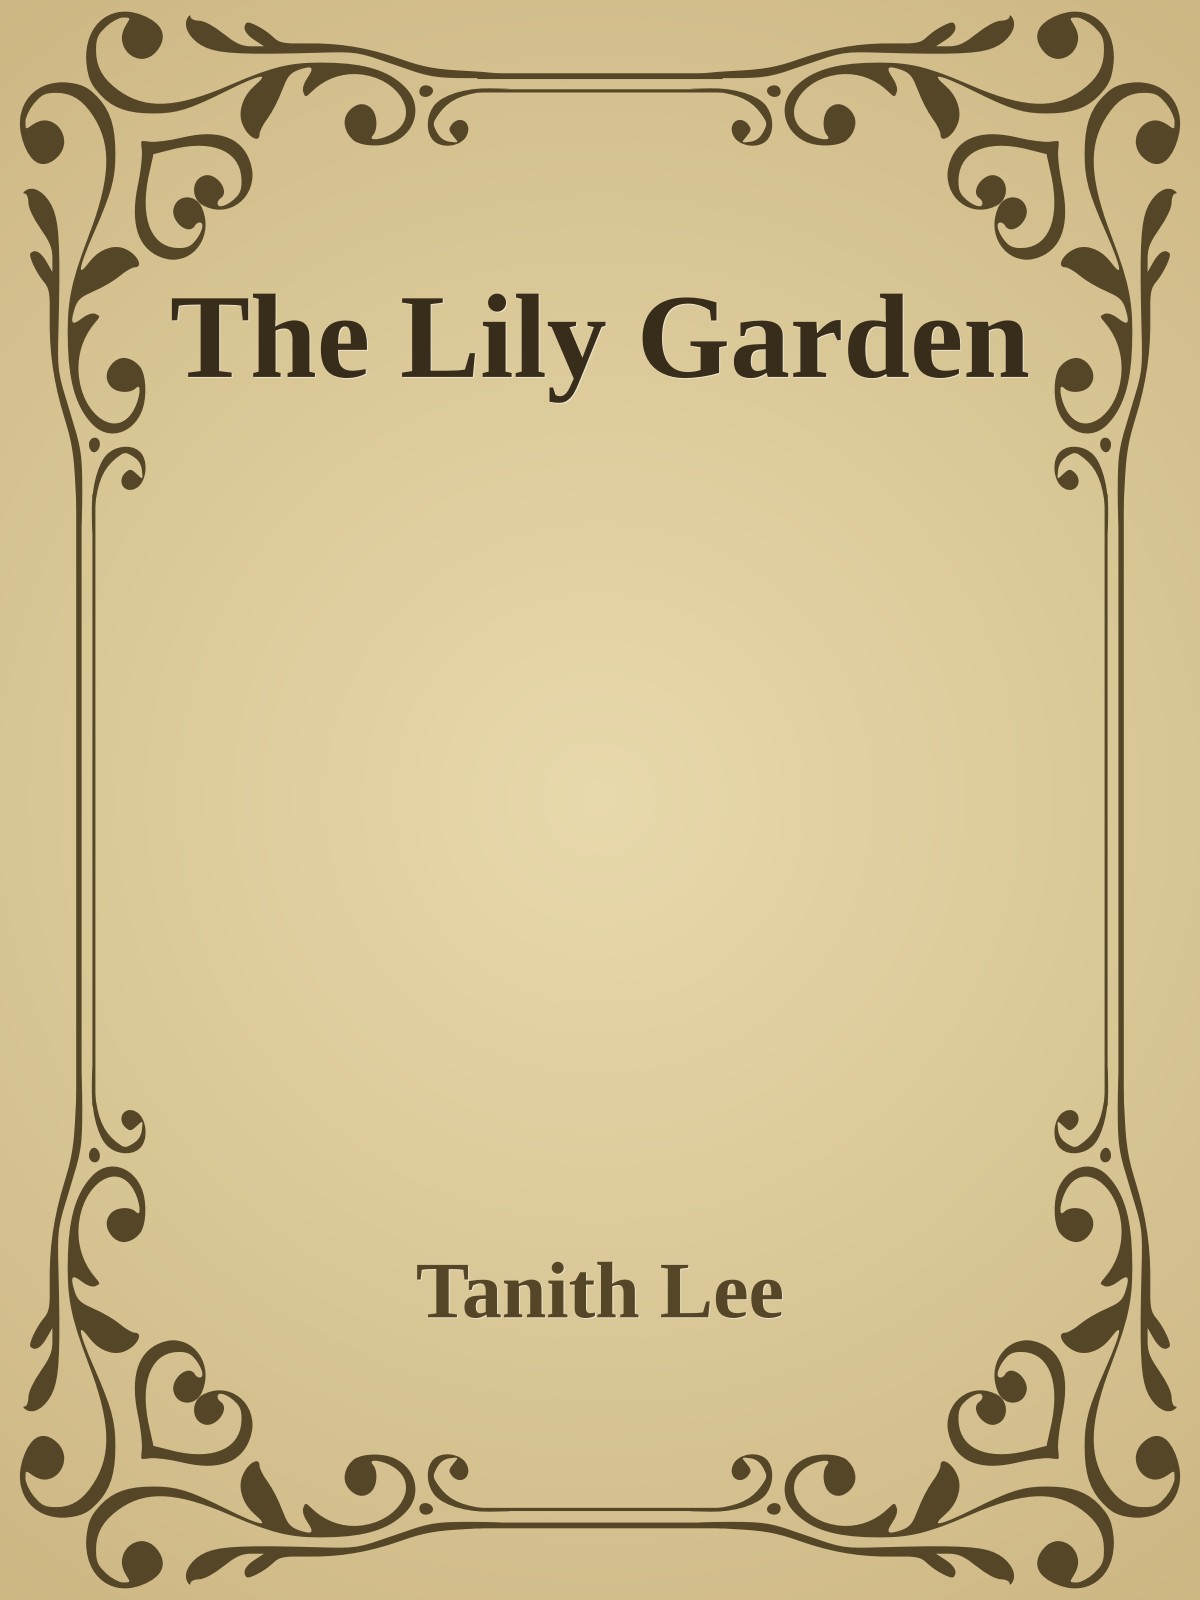 The Lily Garden